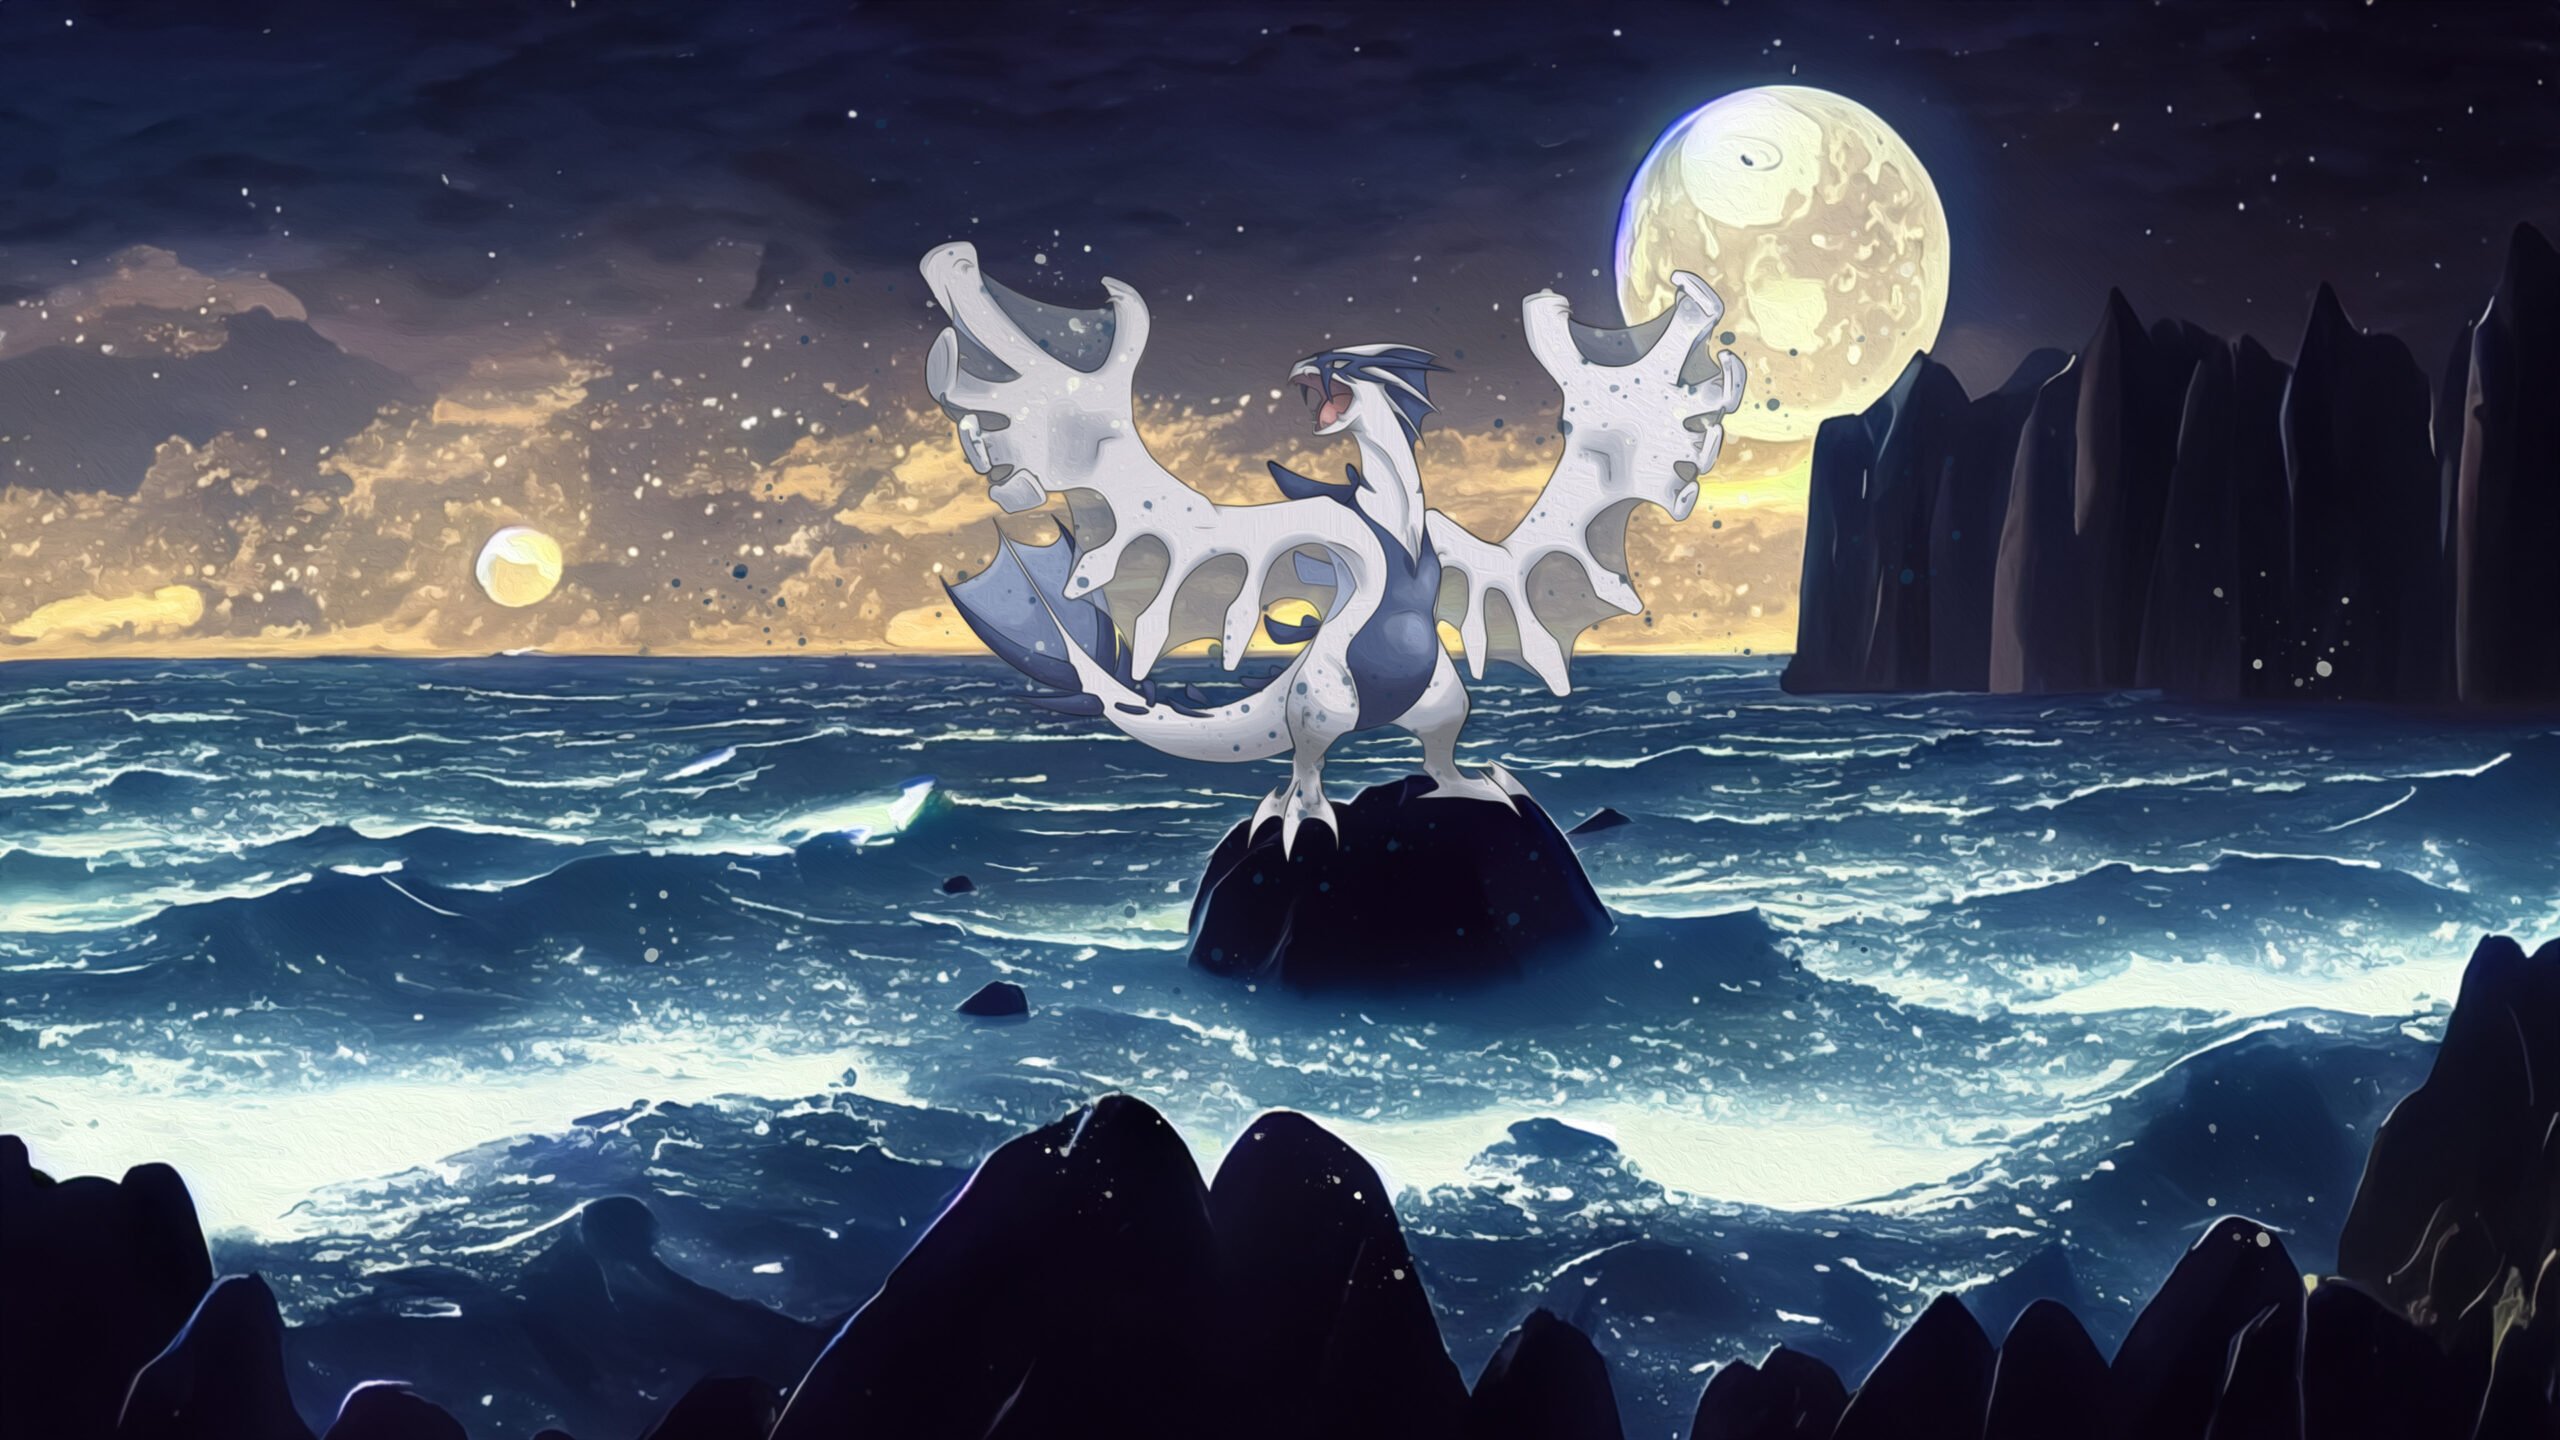 Dark Lugia – Free Download of a Pokémon Wallpaper of Lugia in 4k - for mobile, desktop and tablet